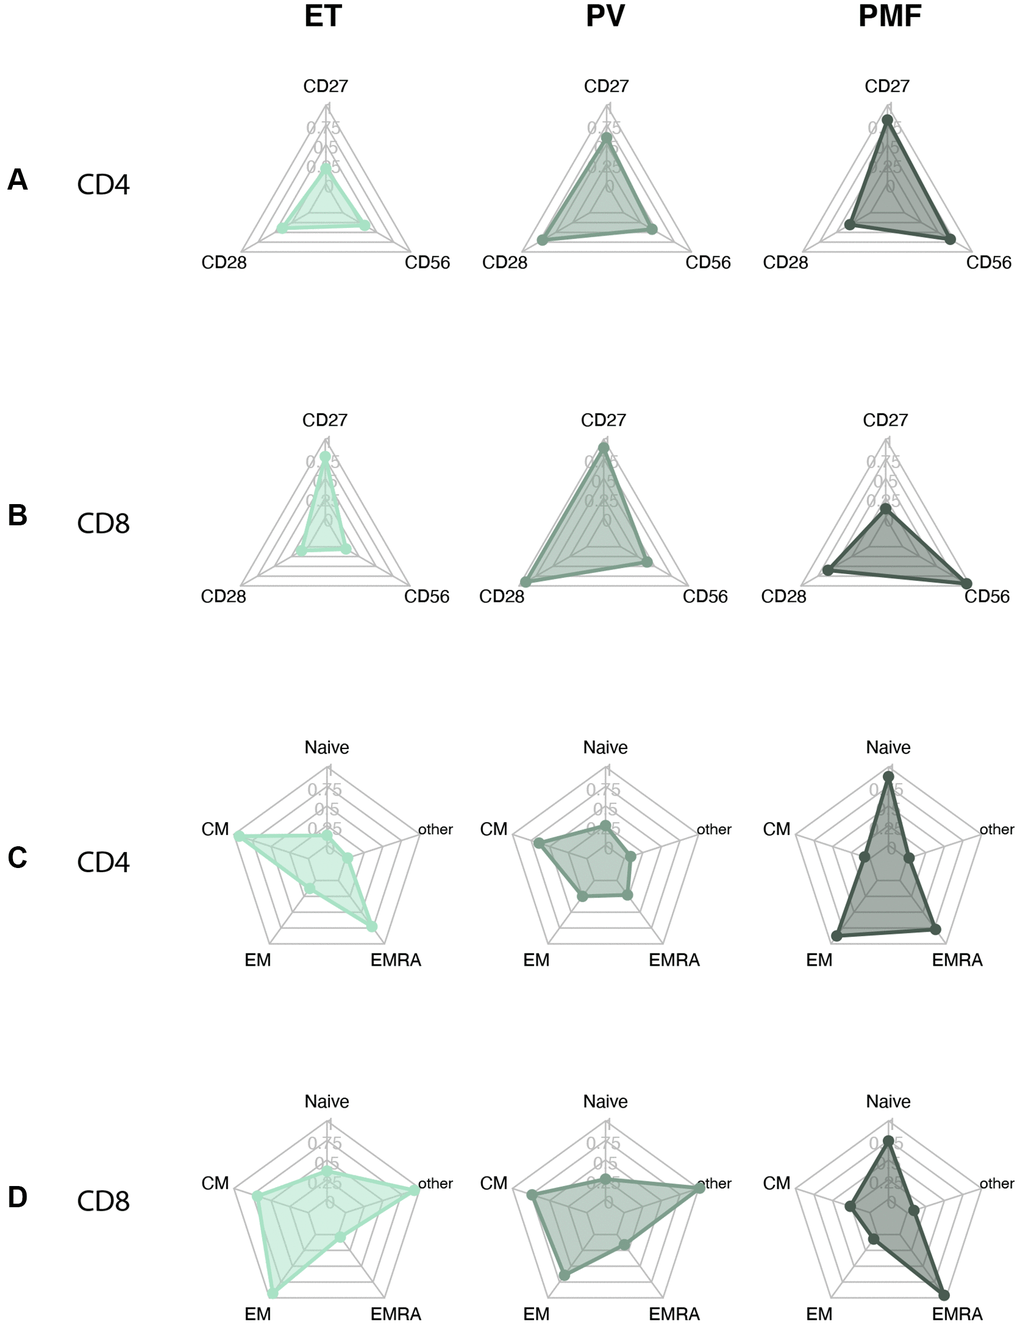 Radarplots MPN subtypes of (A) CD4+ T cell with loss of CD27 and CD28 and CD56 expression. (B) CD8+ T cell with loss of CD27 and CD28 and CD56 expression. (C) CD4+ T cell differentiation profile. (D) CD8+ T cell differentiation profile. A more senescent profile is characterized by loss of CD27 and CD28, more CD56, and more terminally differentiated cells (EM and EMRA). Abbreviations: ET: essential thrombocythemia; PV: polycythemia vera; PMF: primary myelofibrosis. Naïve: naïve T-cells; CM: central memory T cells; EM: effector memory T cells; EMRA: effector memory CD45Ra positive T cells; other: includes intermediate subsets of T cells not belonging to Naïve, CM, EM, or EMRA.